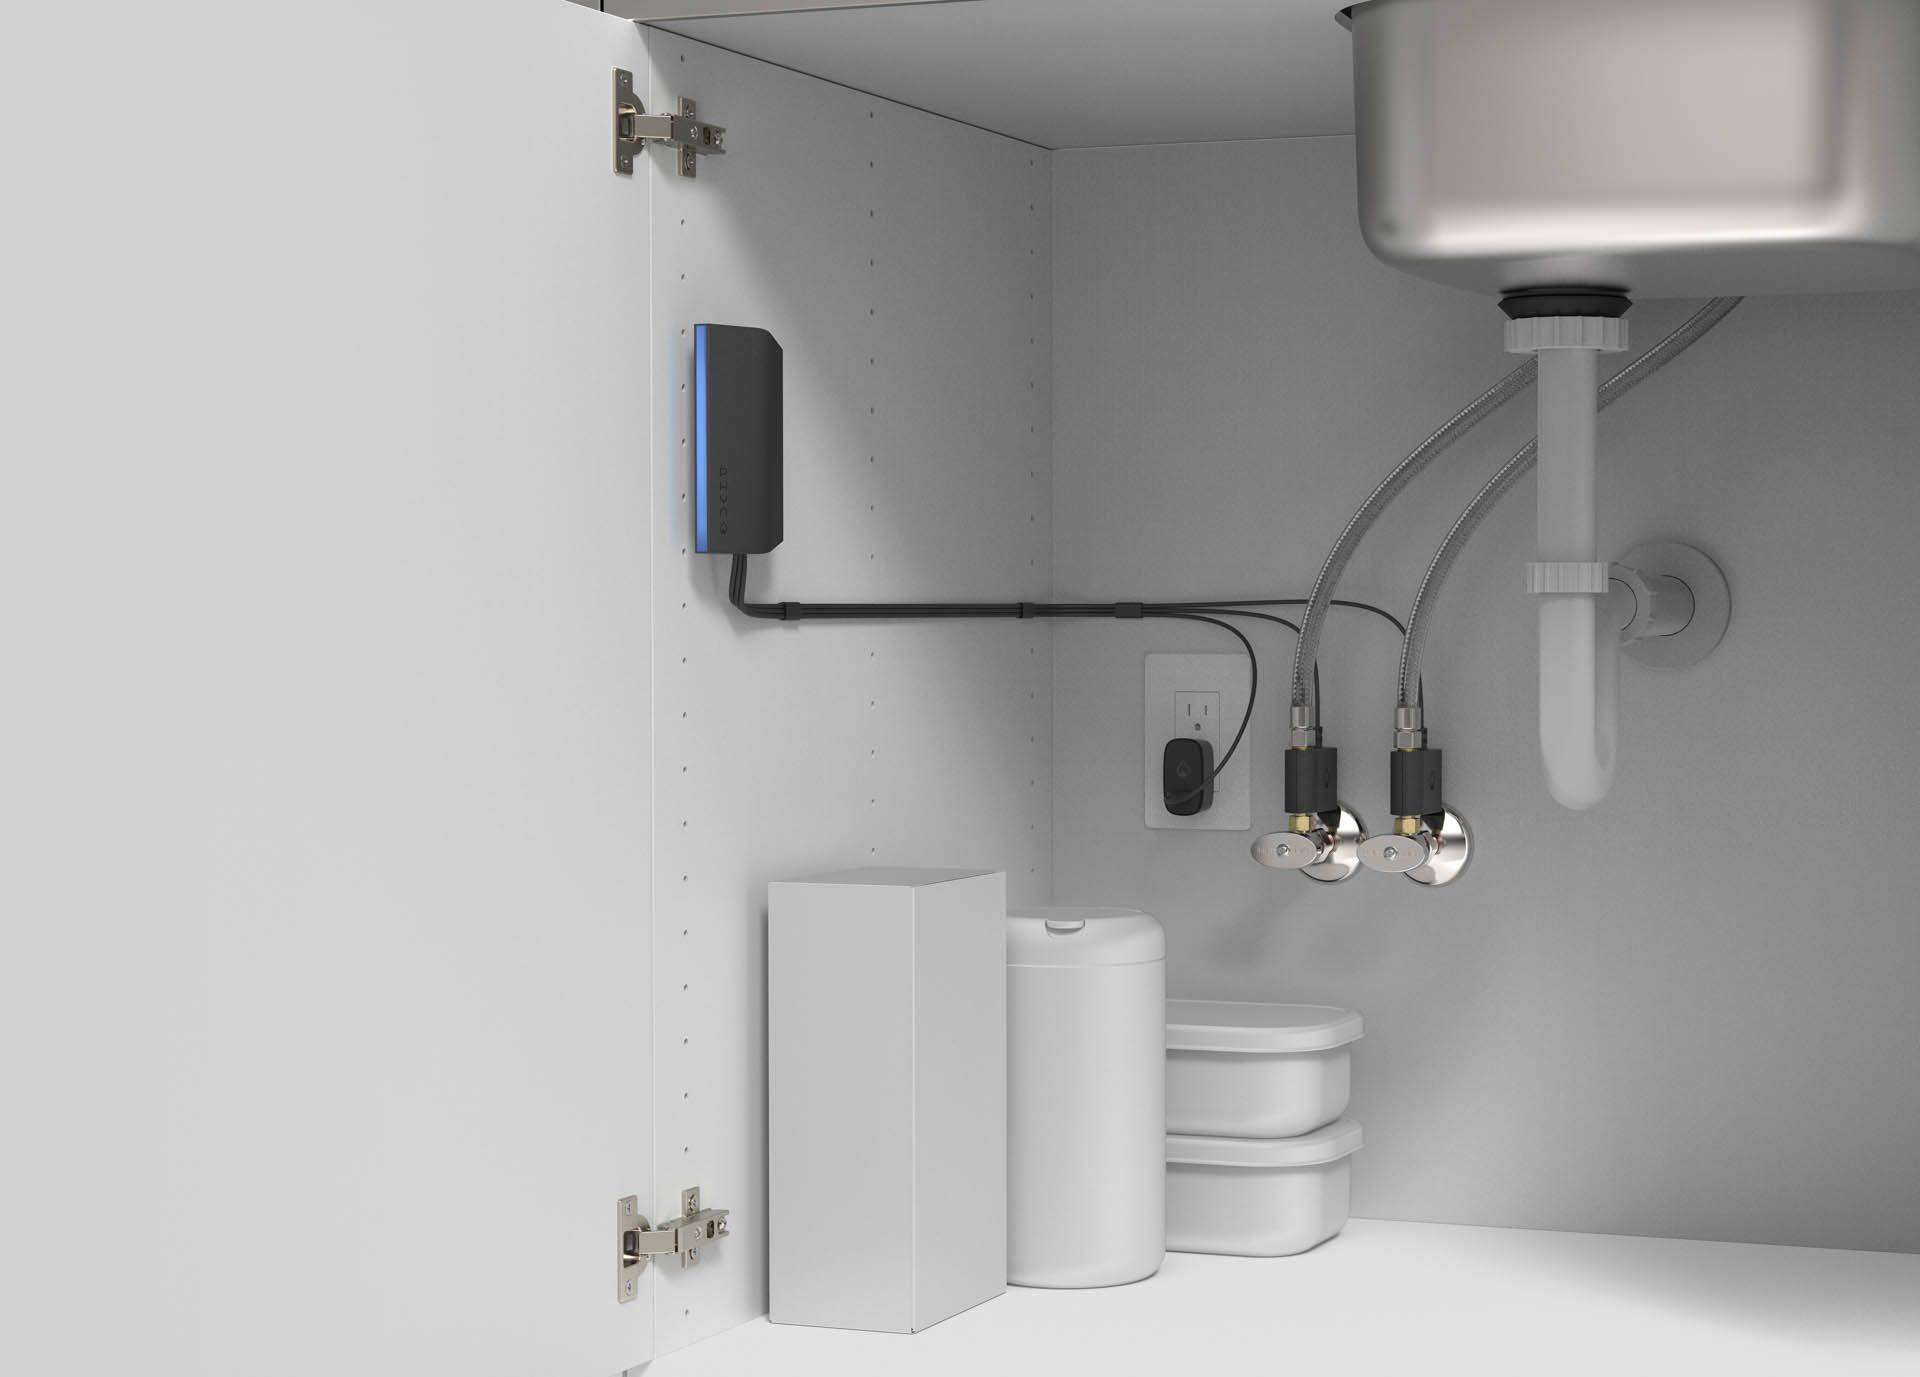 The new Phyn product easily installs under a sink, by connecting to the existing hot and cold water lines. Image: Phyn.